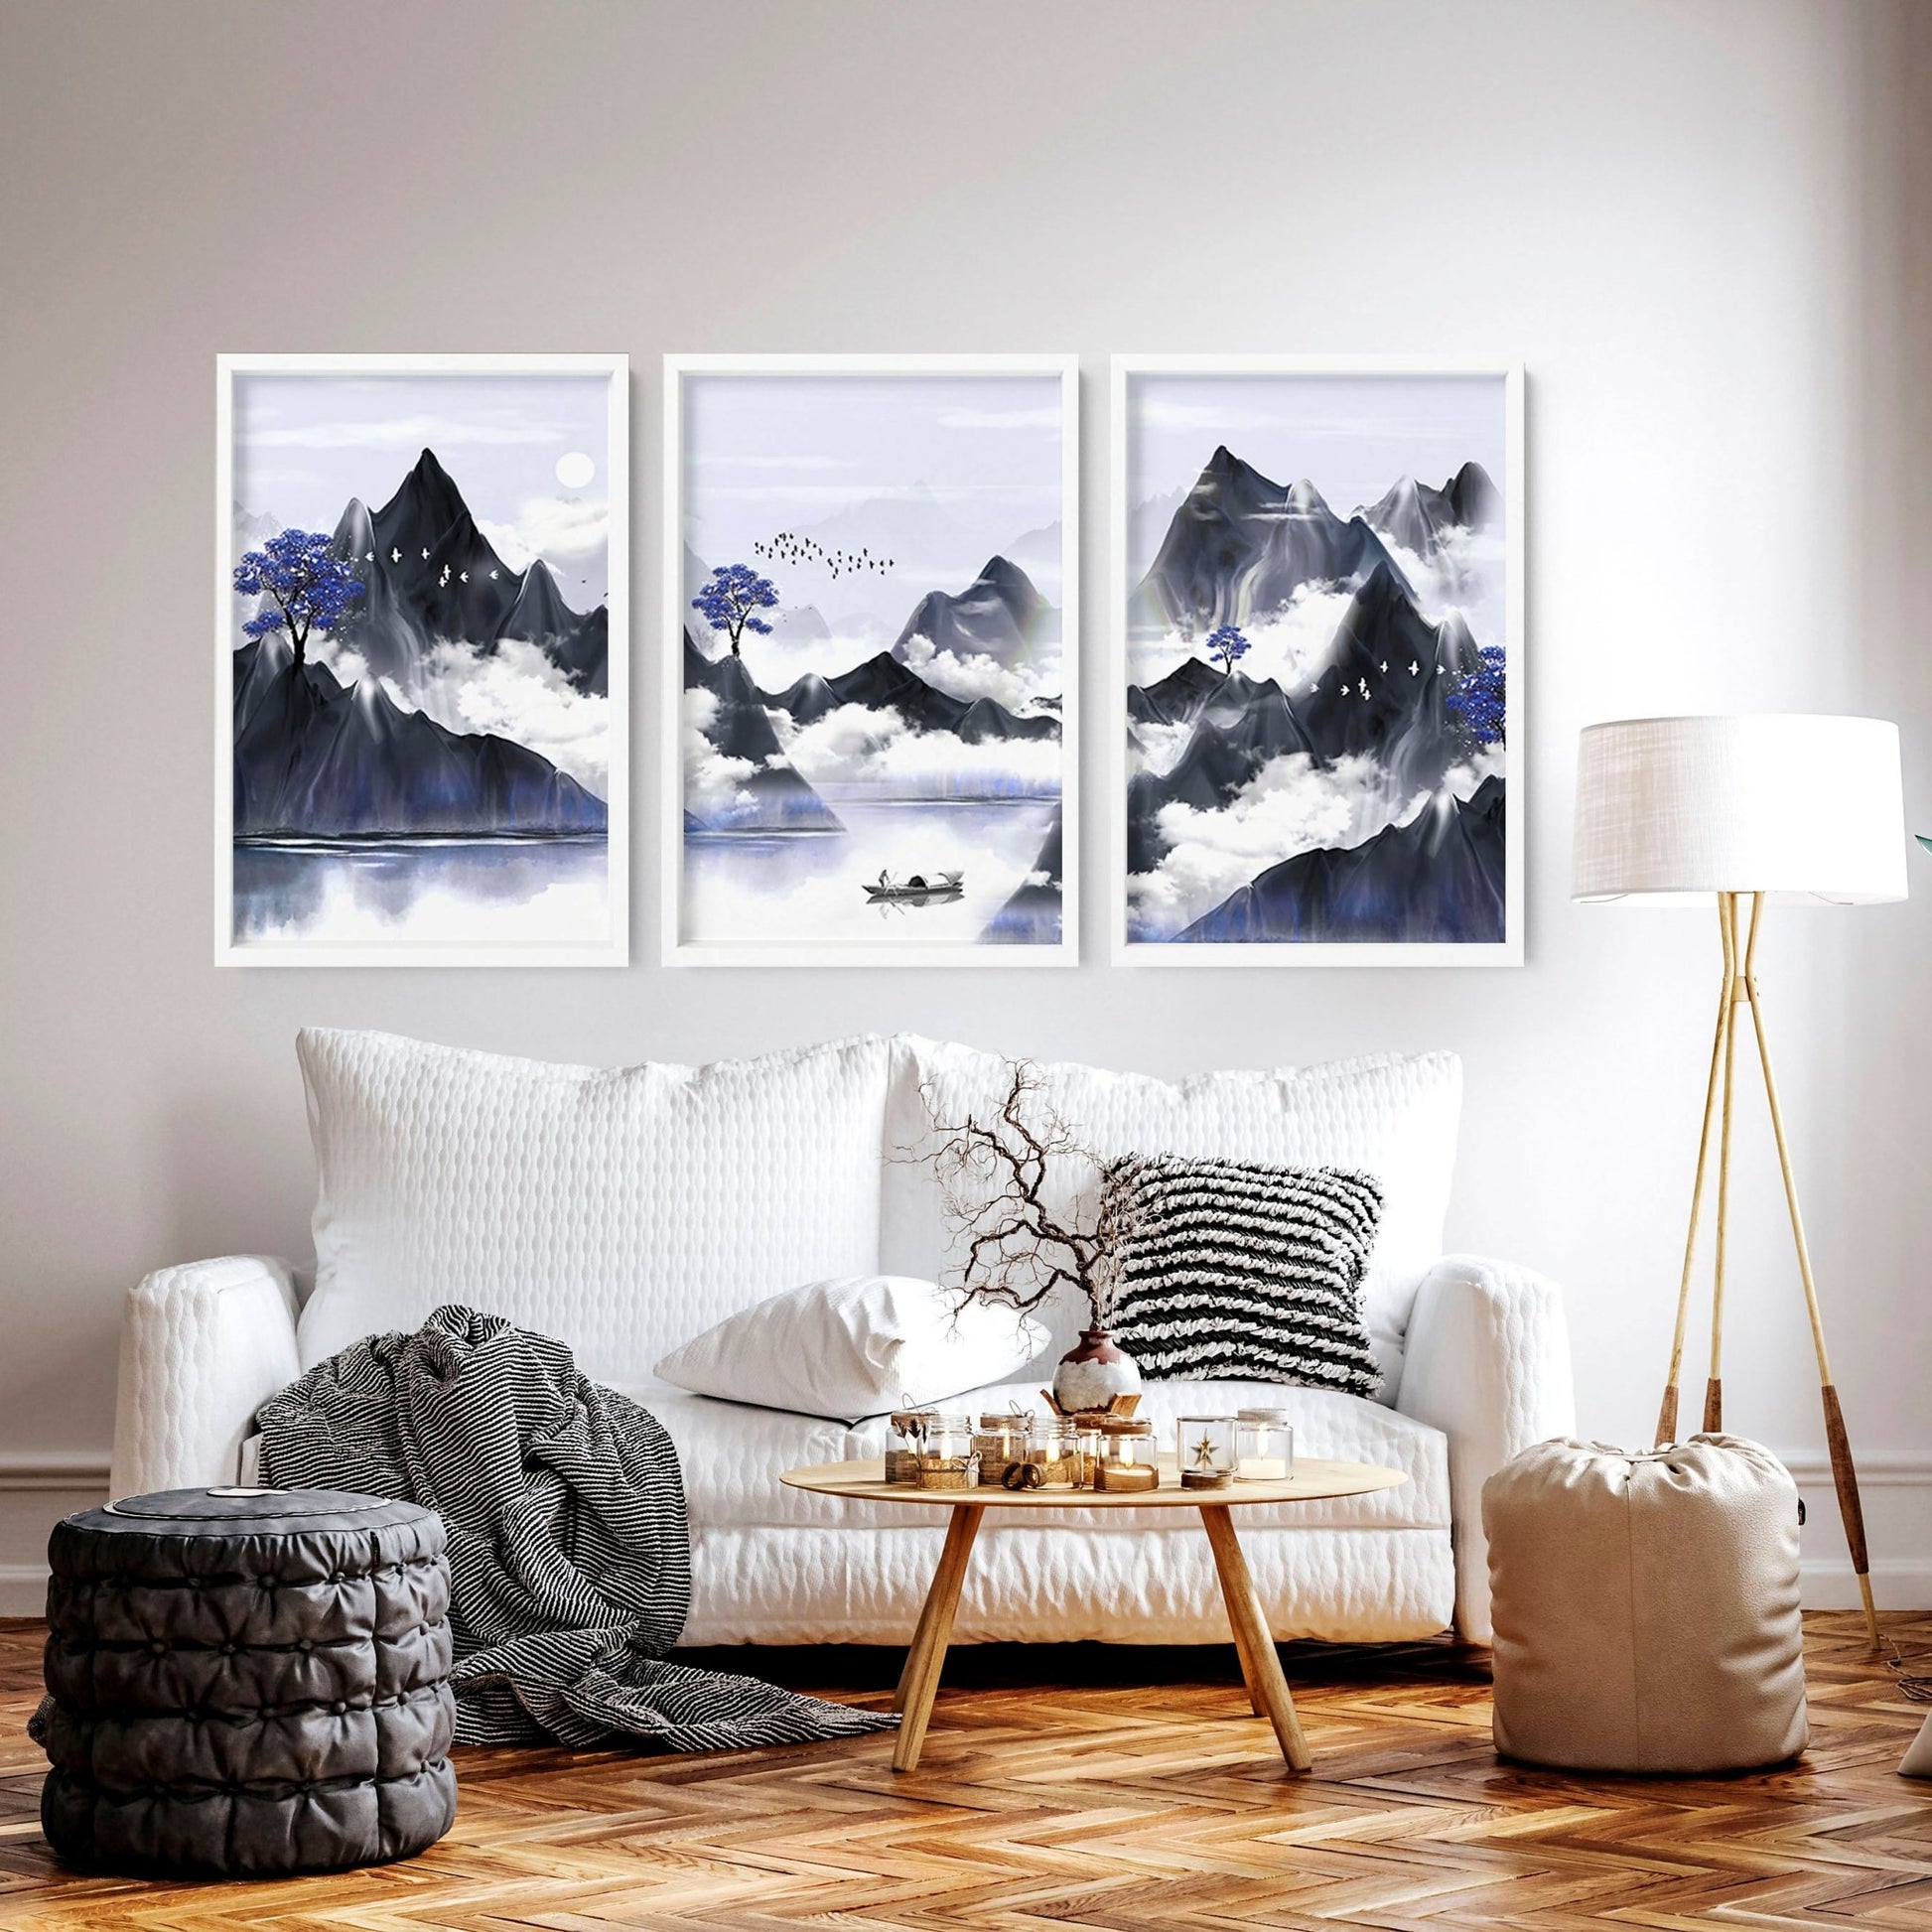 Japanese living room pictures for wall | set of 3 art prints - About Wall Art